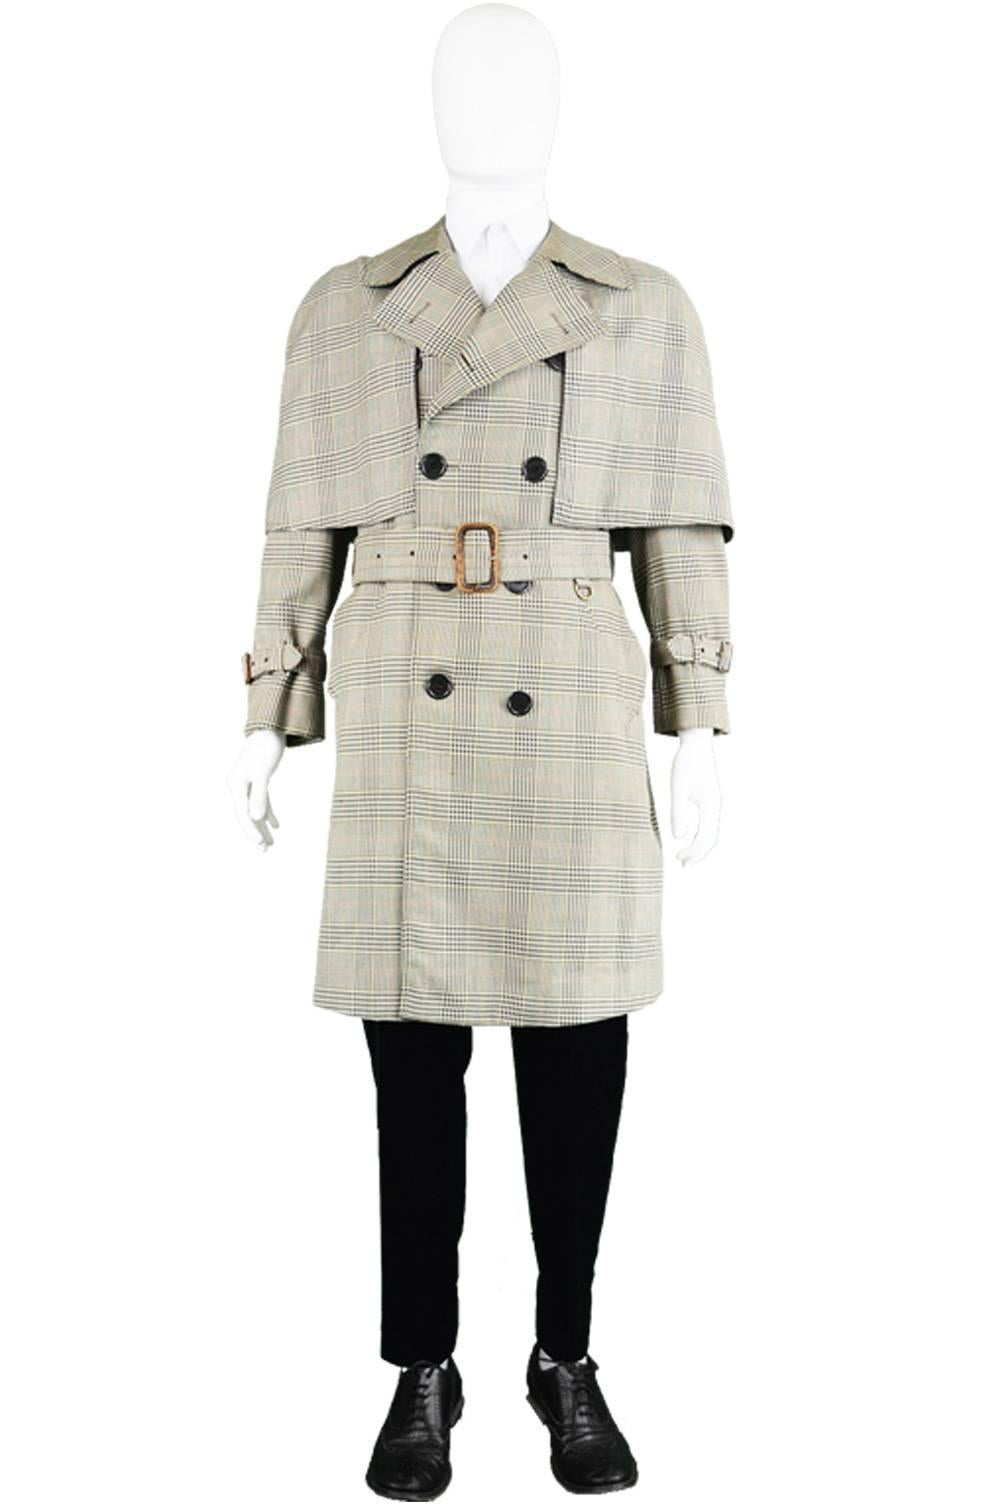 An incredible men's vintage coat from the 1960s by 'The Rayntre' for classic British luxury department store, Harrods. This rare inverness cape coat has a detachable cape for a versatile look. With double breasted buttons, a prince of wales check